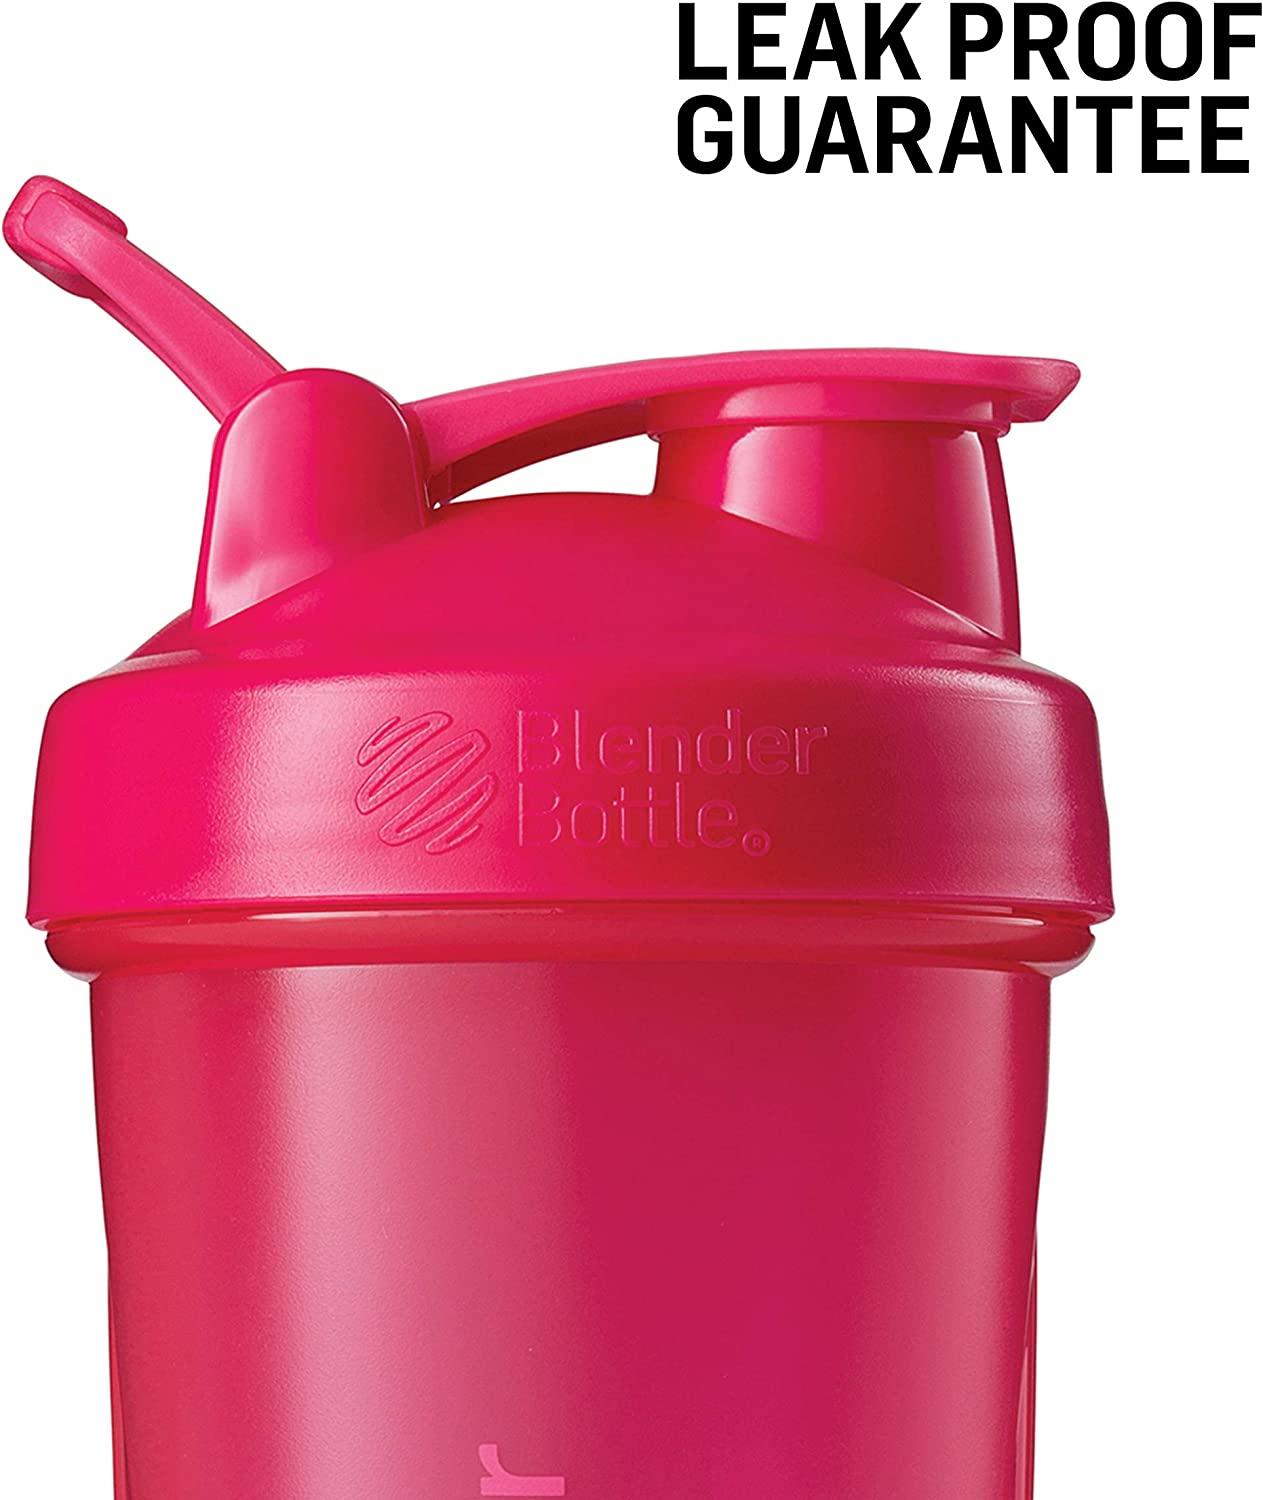 Classic Shaker Bottle Perfect for Protein Shakes and Pre Workout